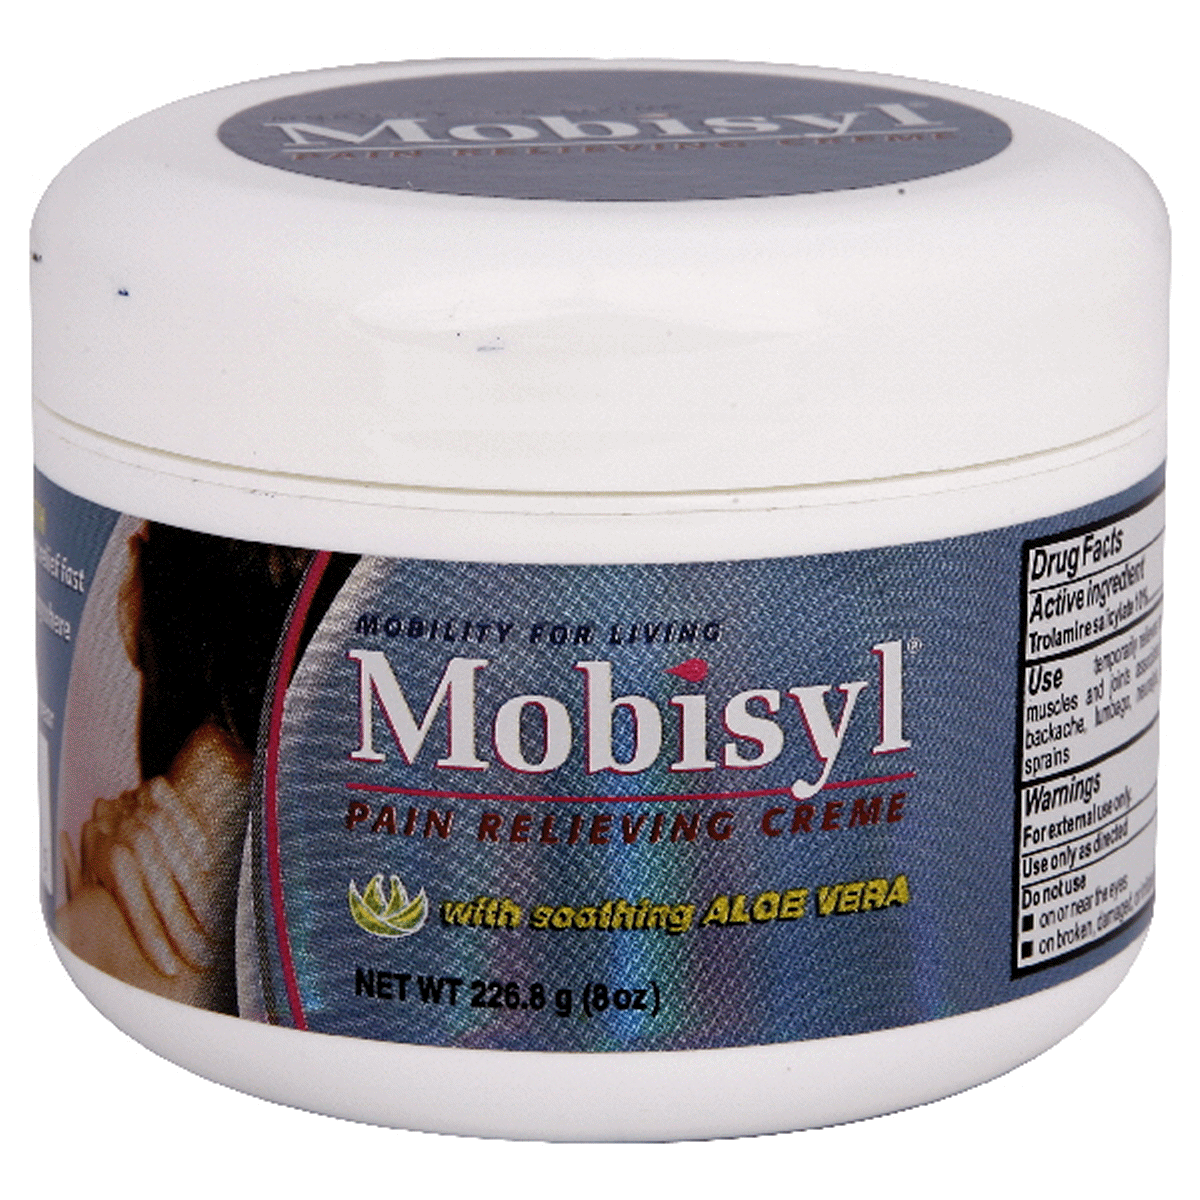 slide 1 of 1, Mobisyl Pain Relieving Creme, 8 oz